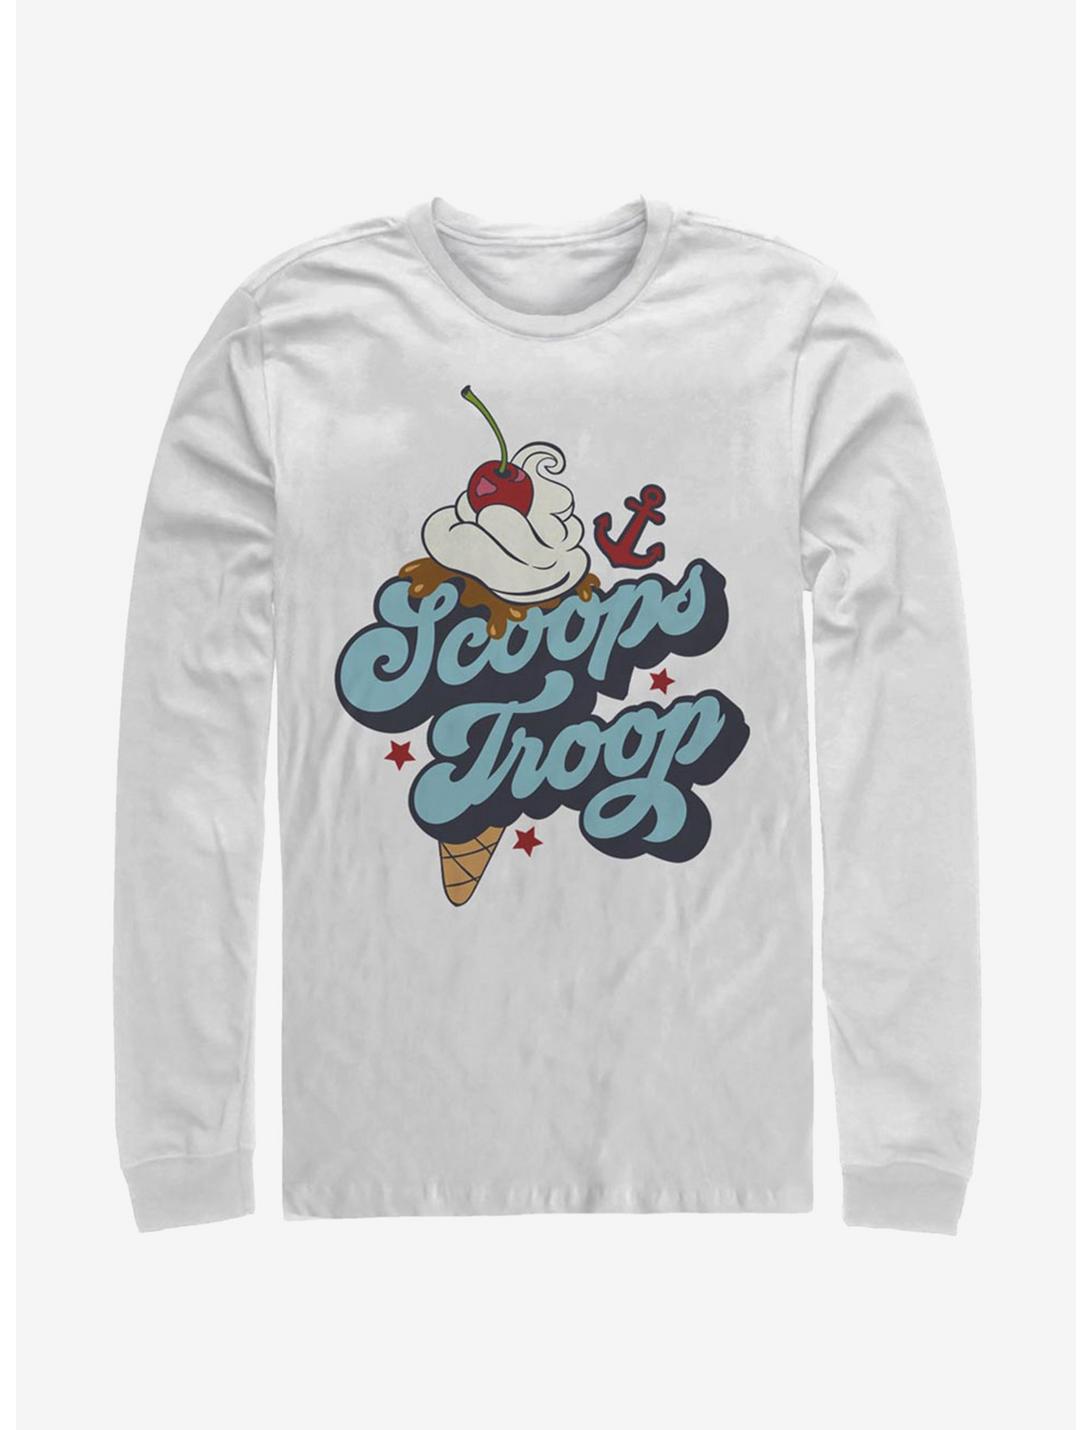 Stranger Things Scoops Troops Long-Sleeve T-Shirt, WHITE, hi-res